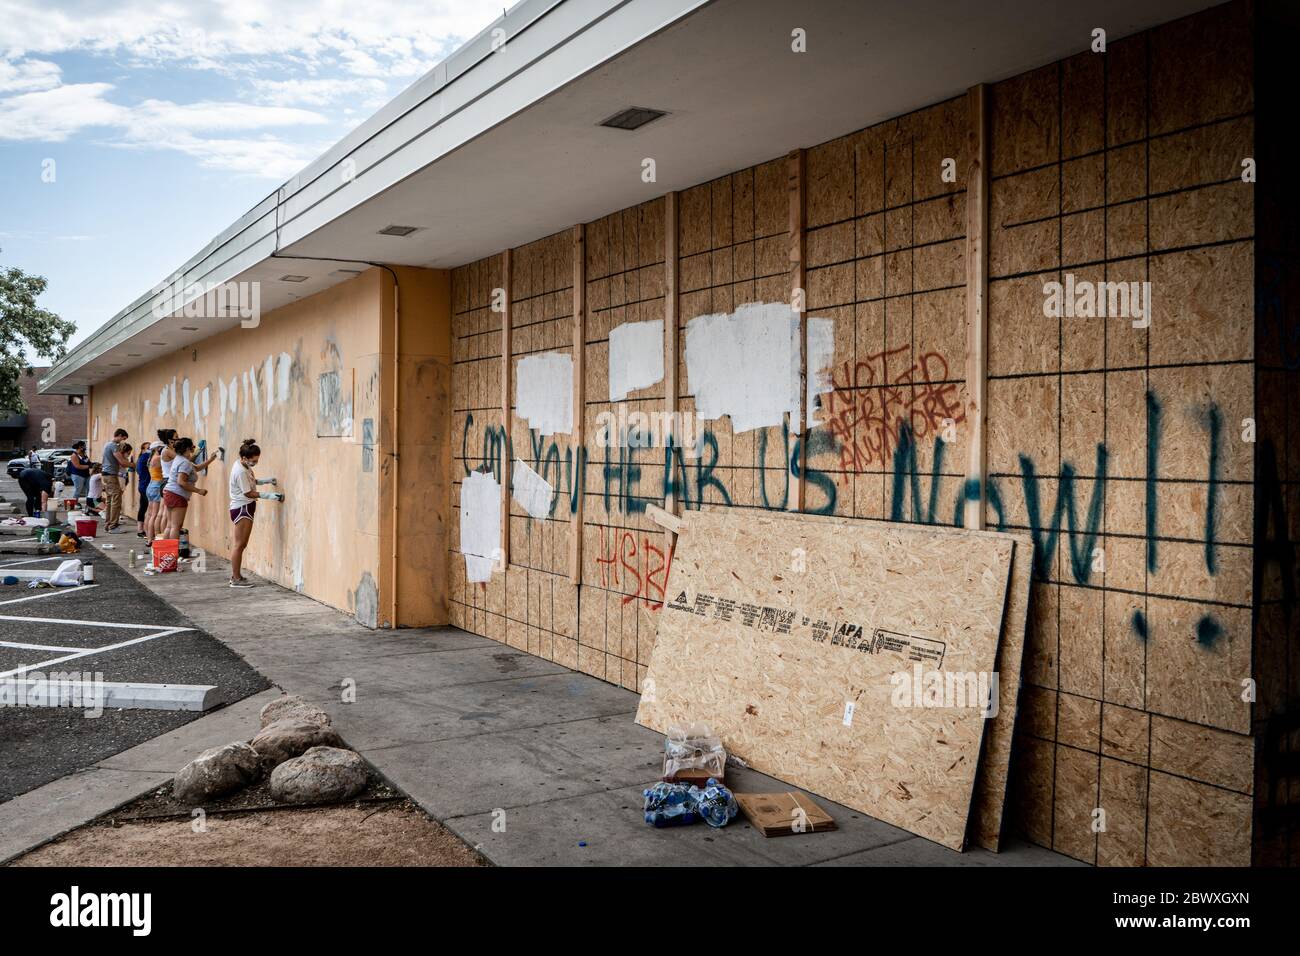 Minneapolis, Minnesota / USA - June 2 2020: Volunteers clean up graffiti on damaged and wrecked building with haunting 'Can you hear us now' graffiti Stock Photo